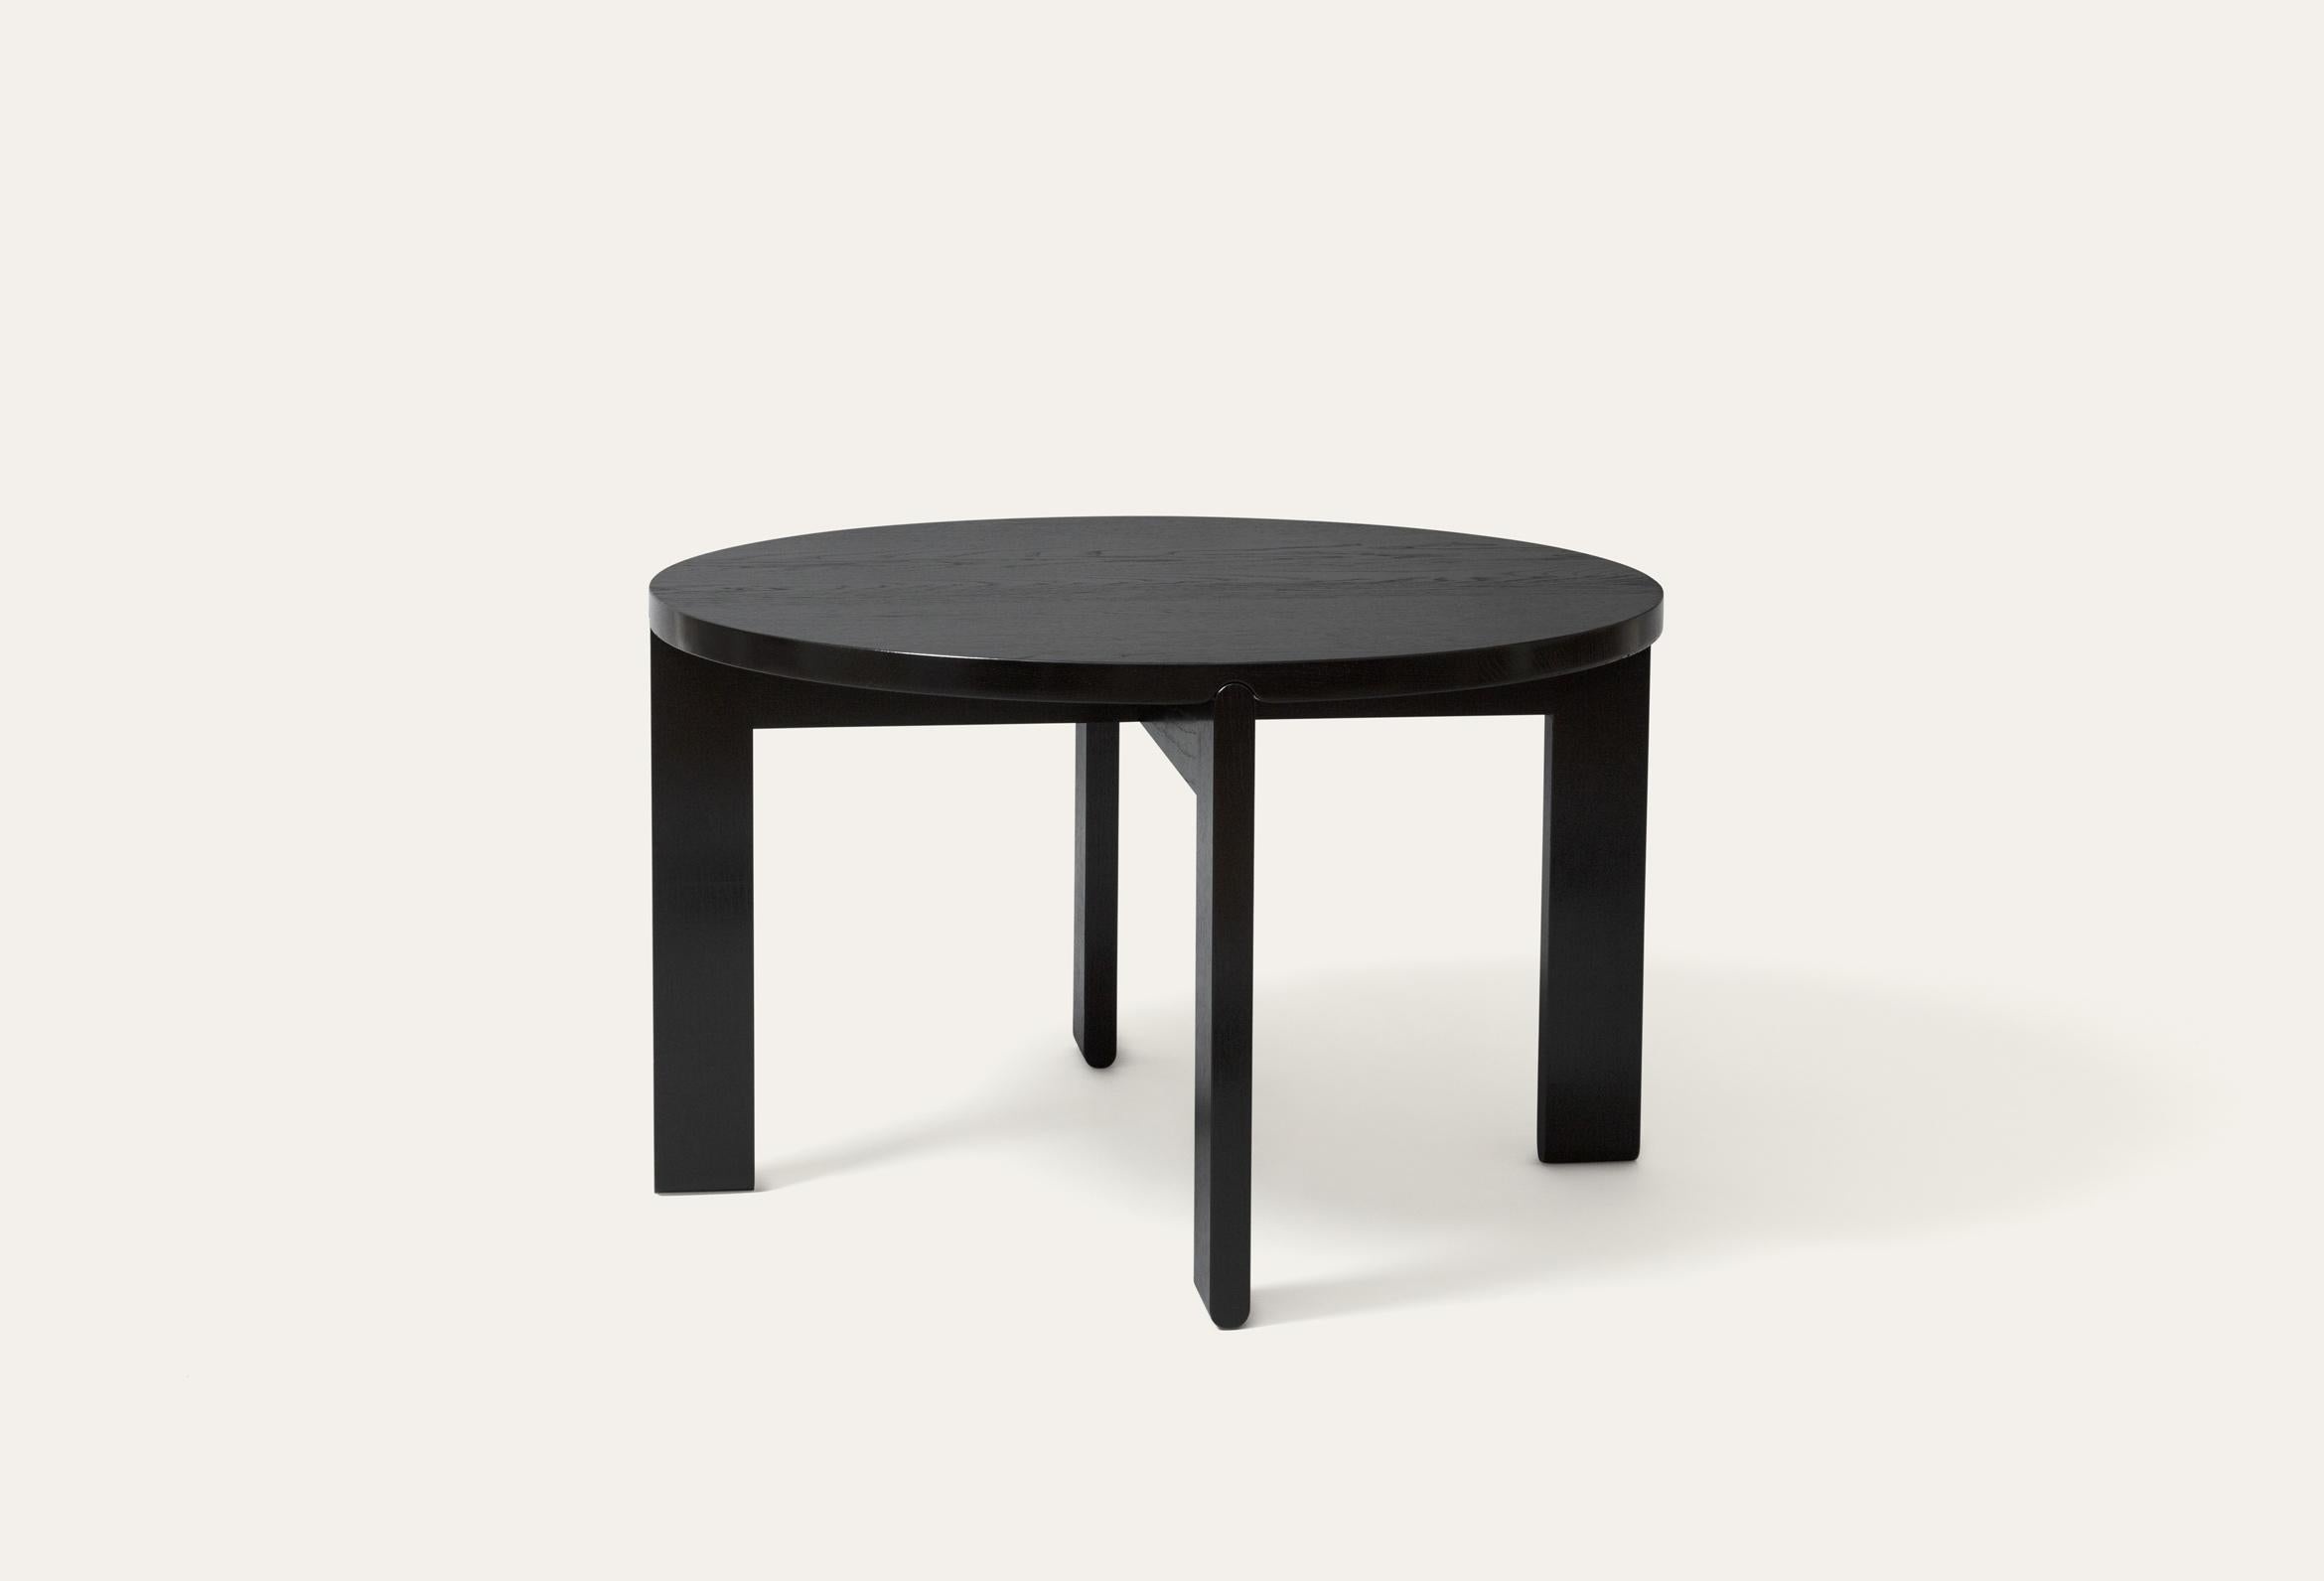 Rond coffee table by Storängen Design
Dimensions: D 75 x H 45 cm
Materials: birch wood.
Available in other colors and 2 sizes: D100cm, D75cm.

Rond is a coffee table made in solid oak. The different diameters and heights create many